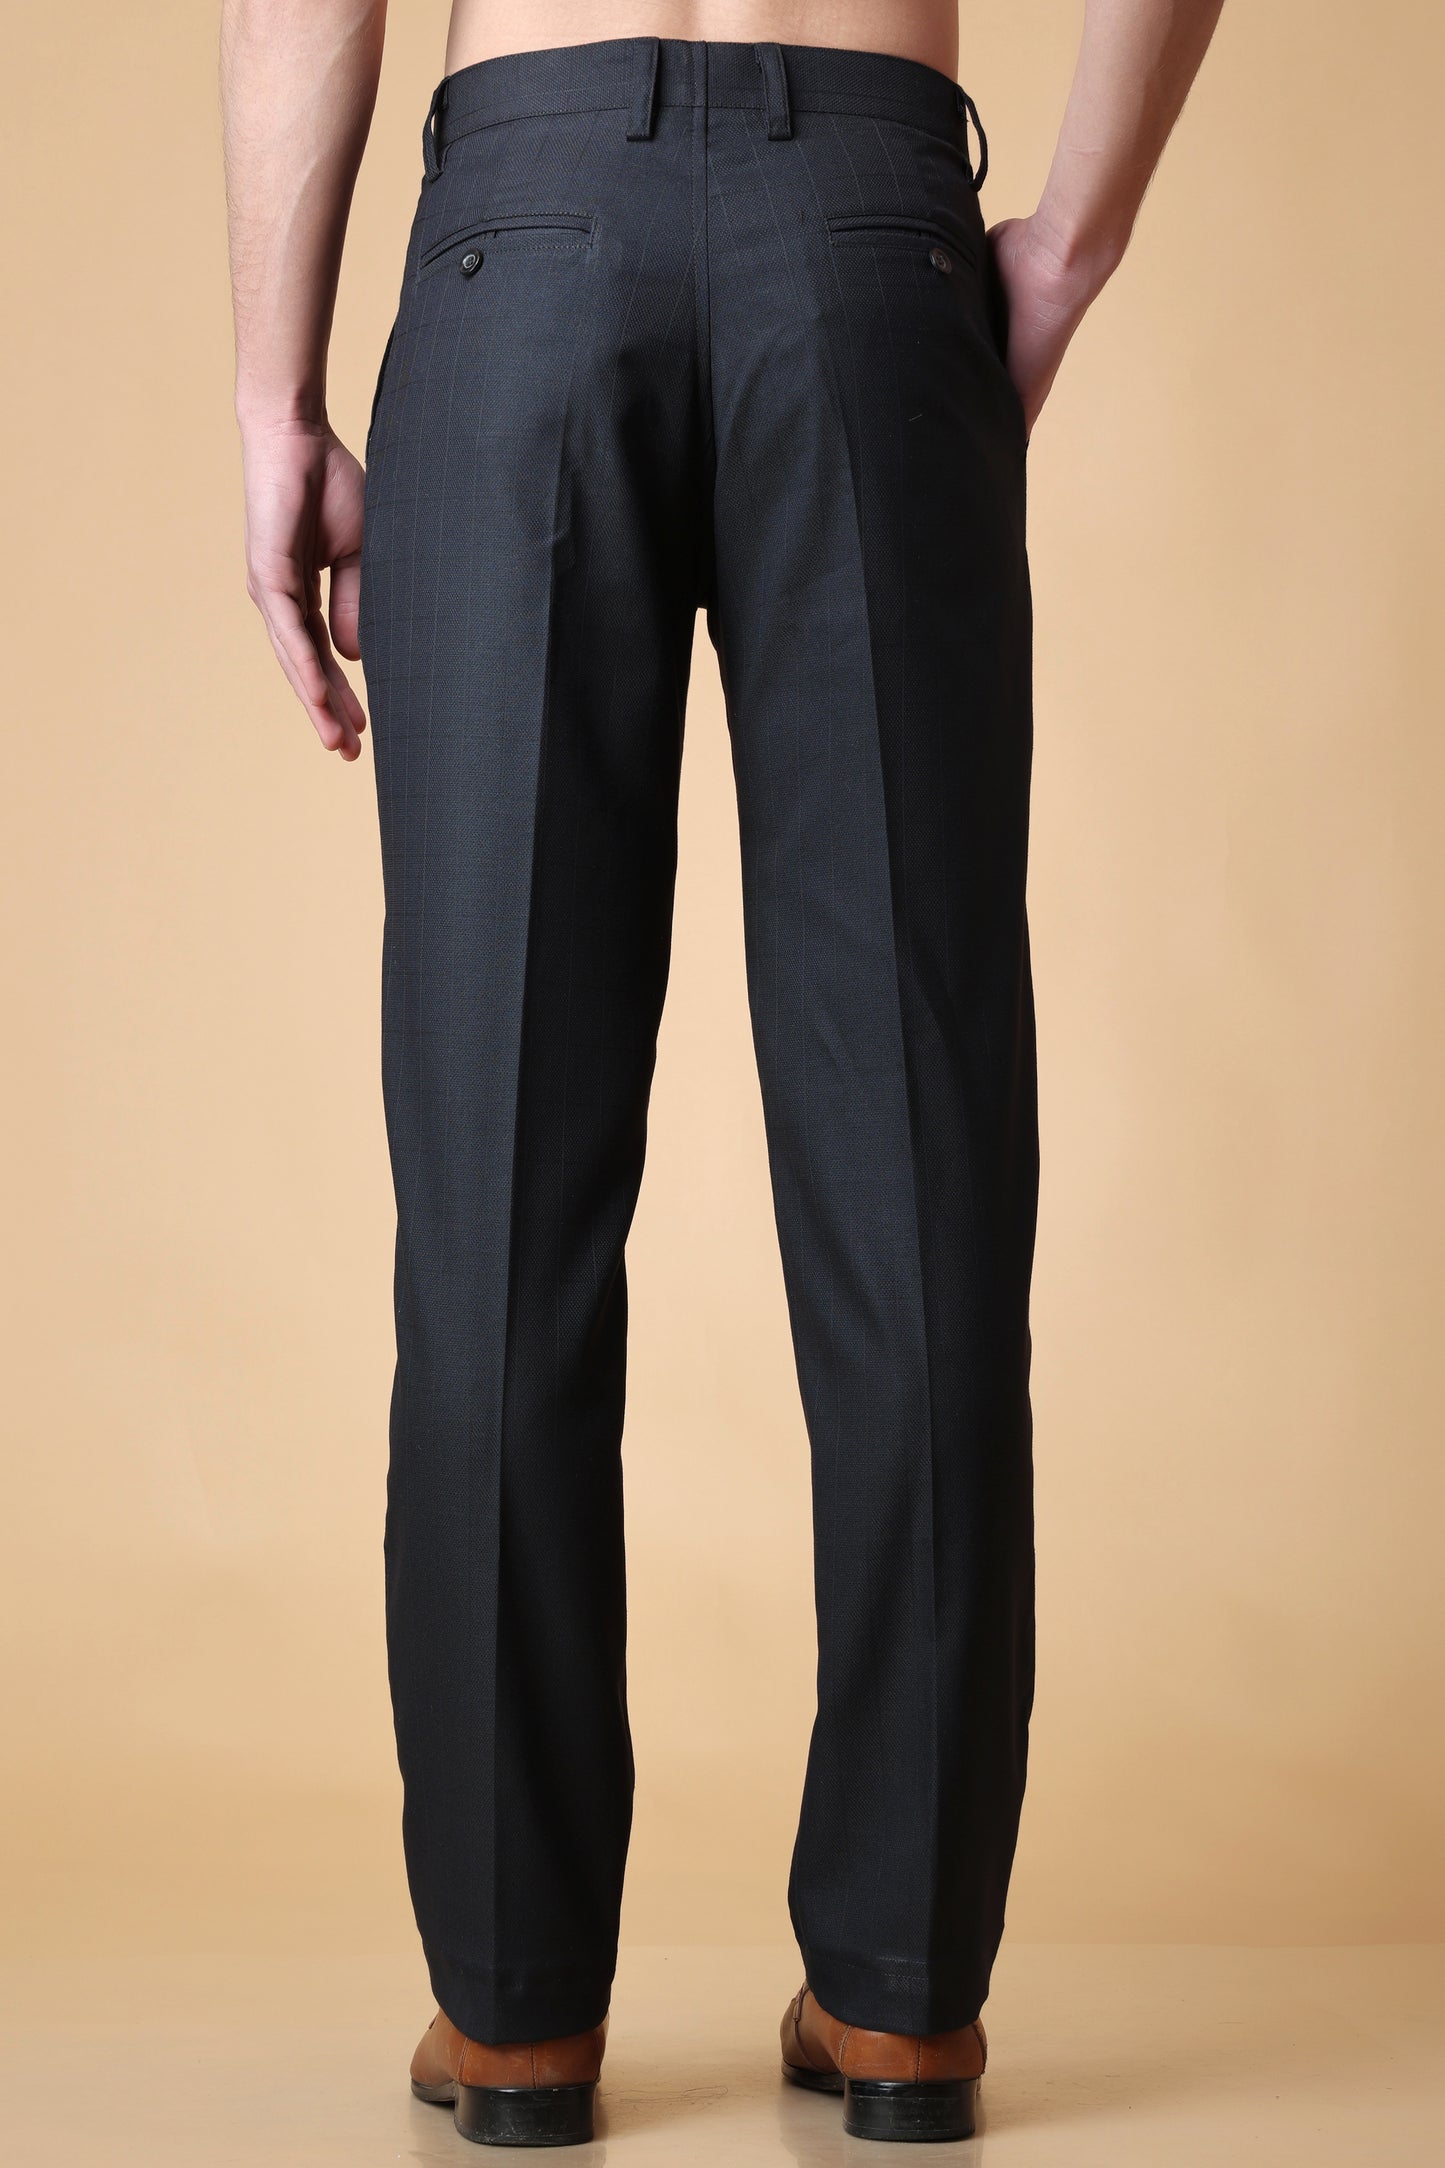 Men's Plus Size Black Checkered Formal Trousers